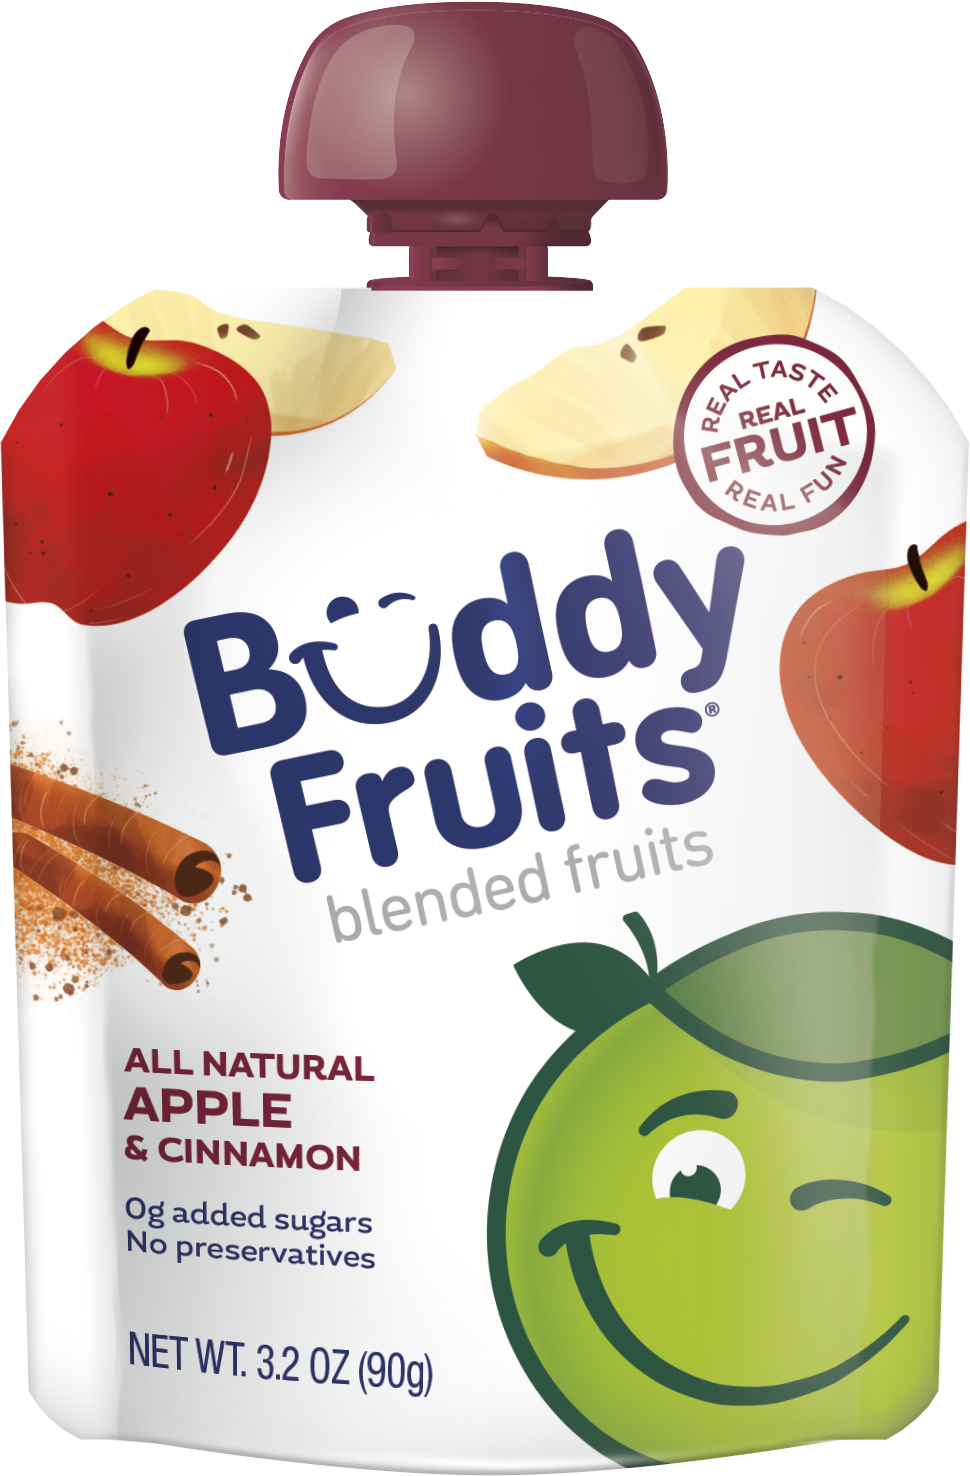 Buddy Fruits Pure Blended Apple And Cinnamon Snack-3.2 oz.-18/Case